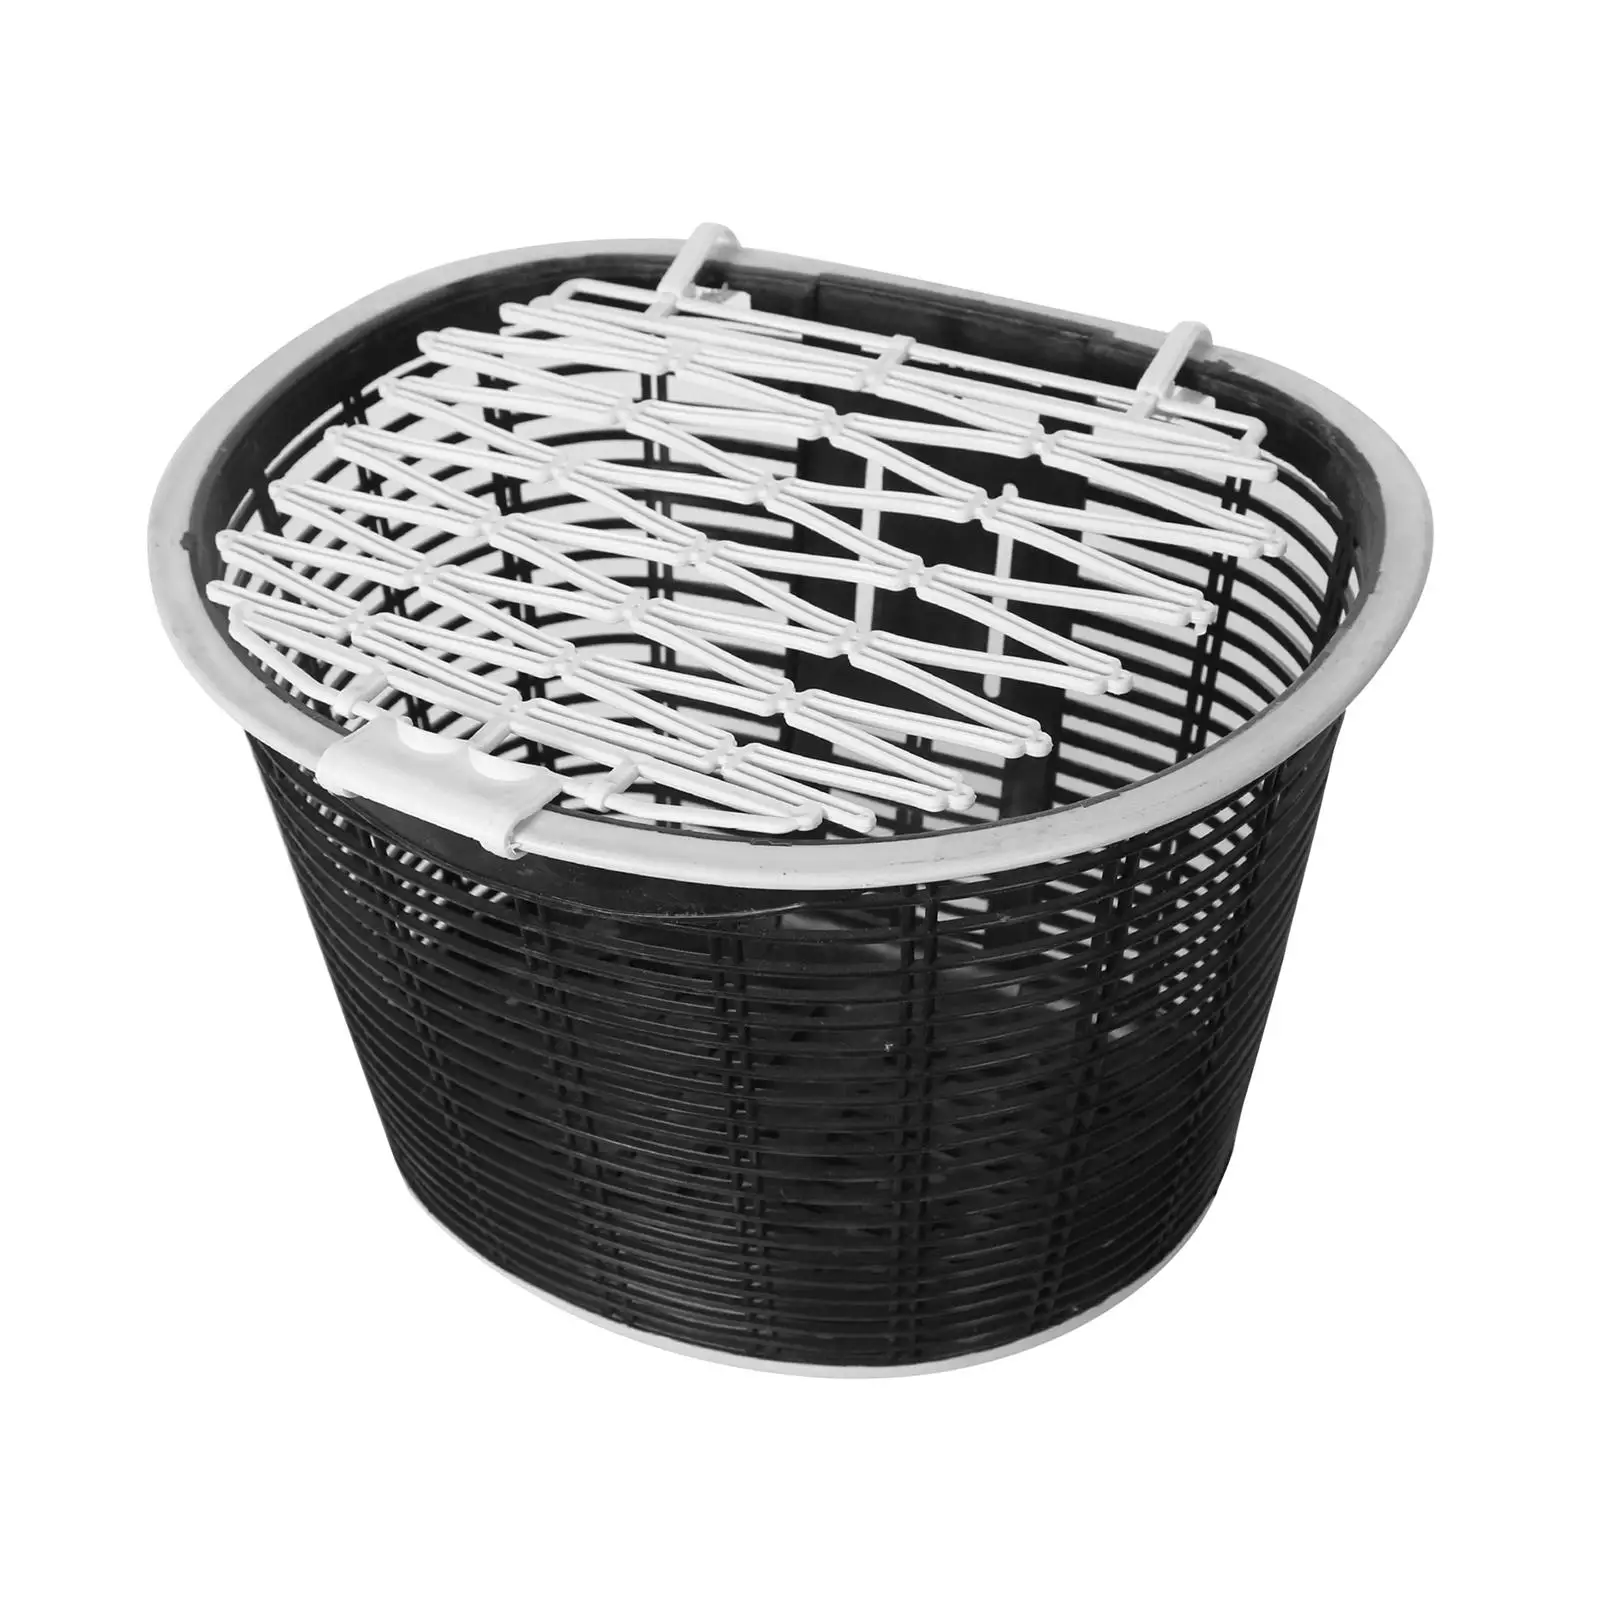 Bike Basket Easy to Install with Cover Detachable Bicycle Basket for Travel Balance Bike Mountain Road Bike Outdoor Equipment